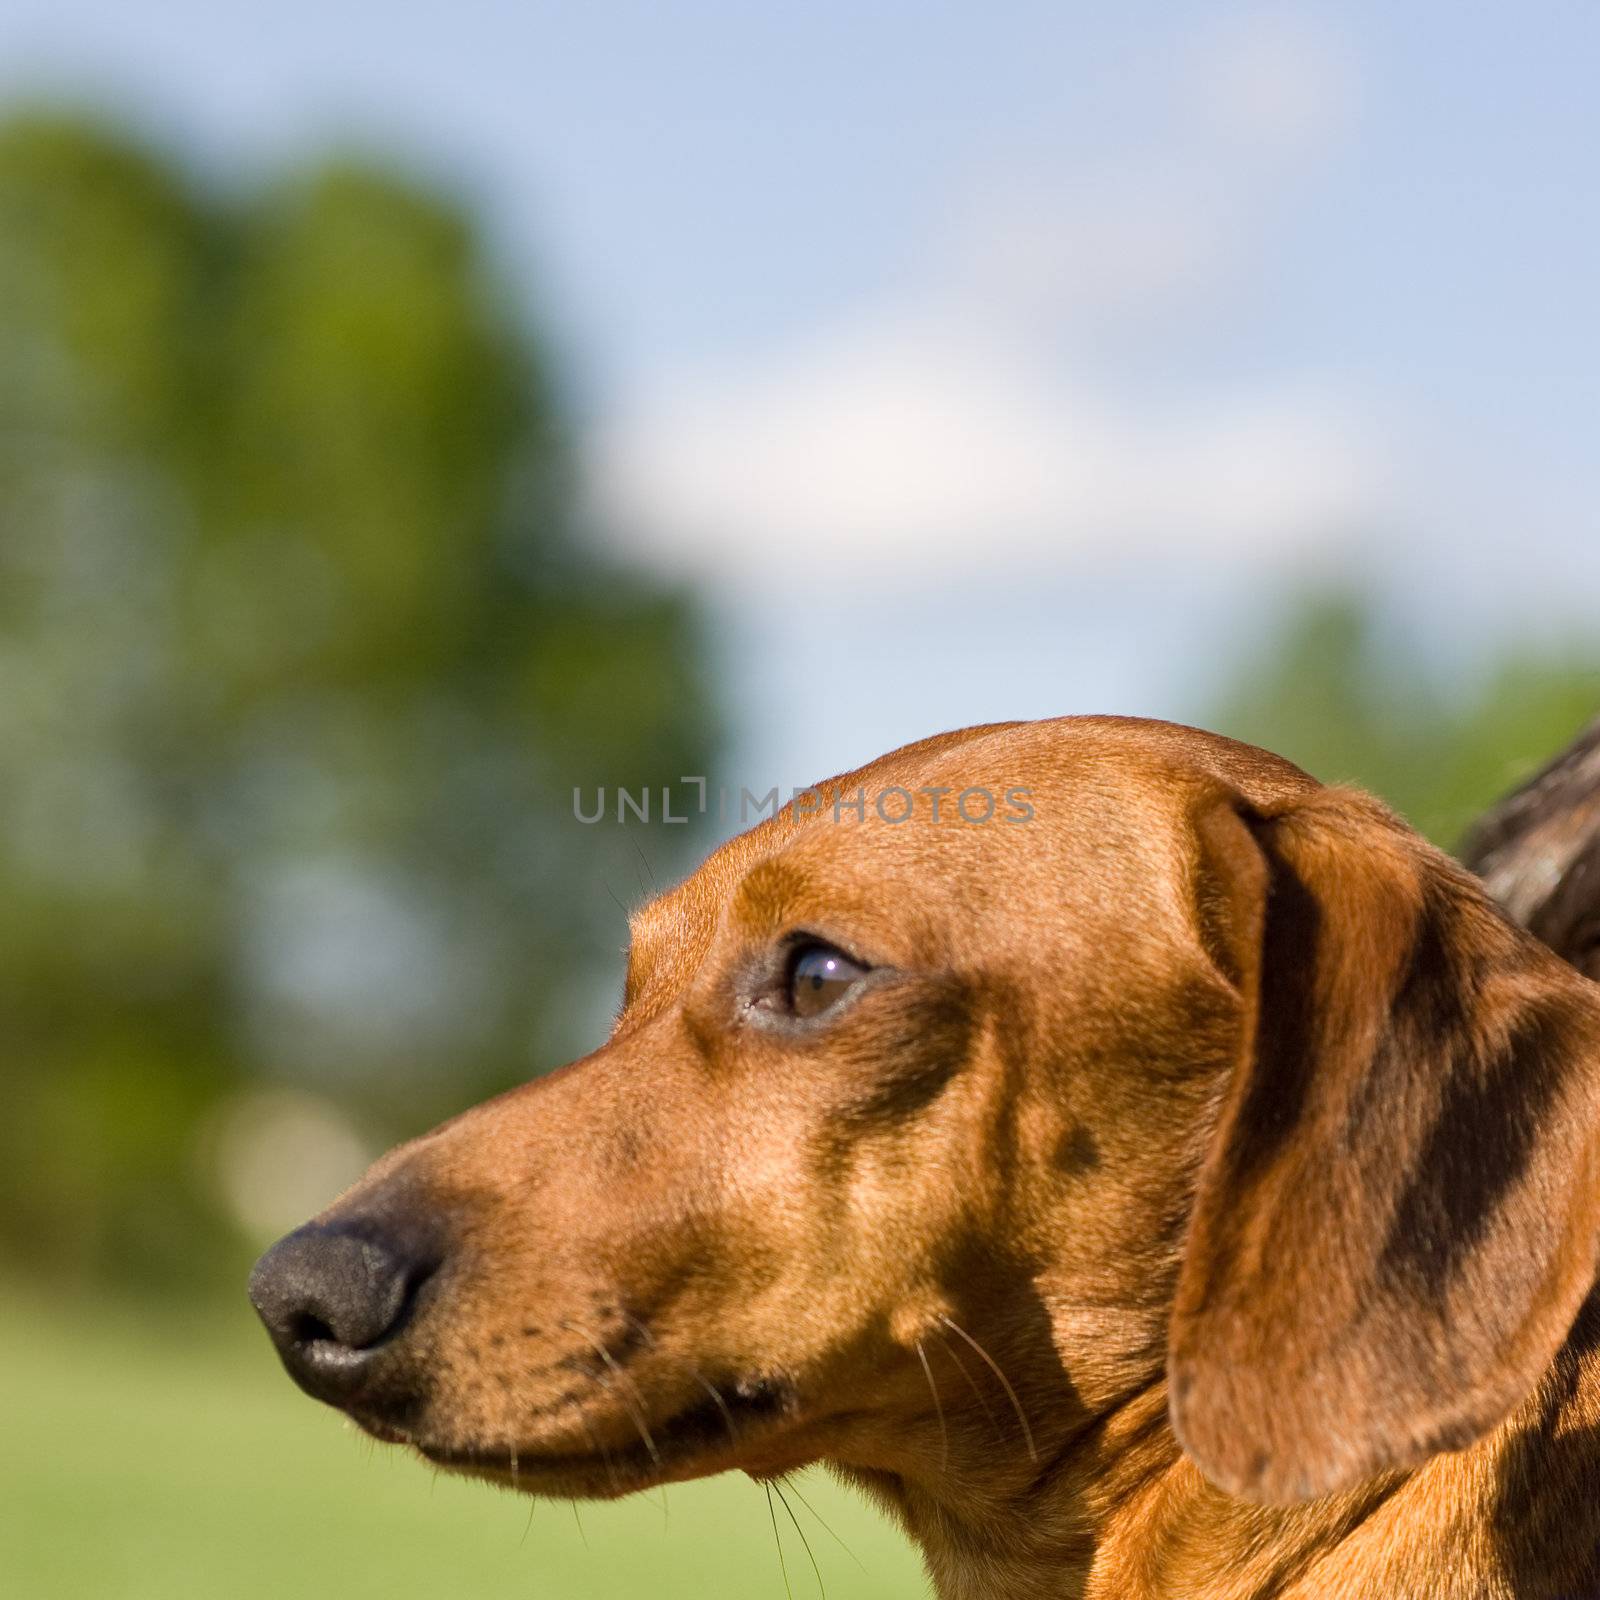 A miniature Dachshund head, staring intently ahead, against an outdoor blurred background.